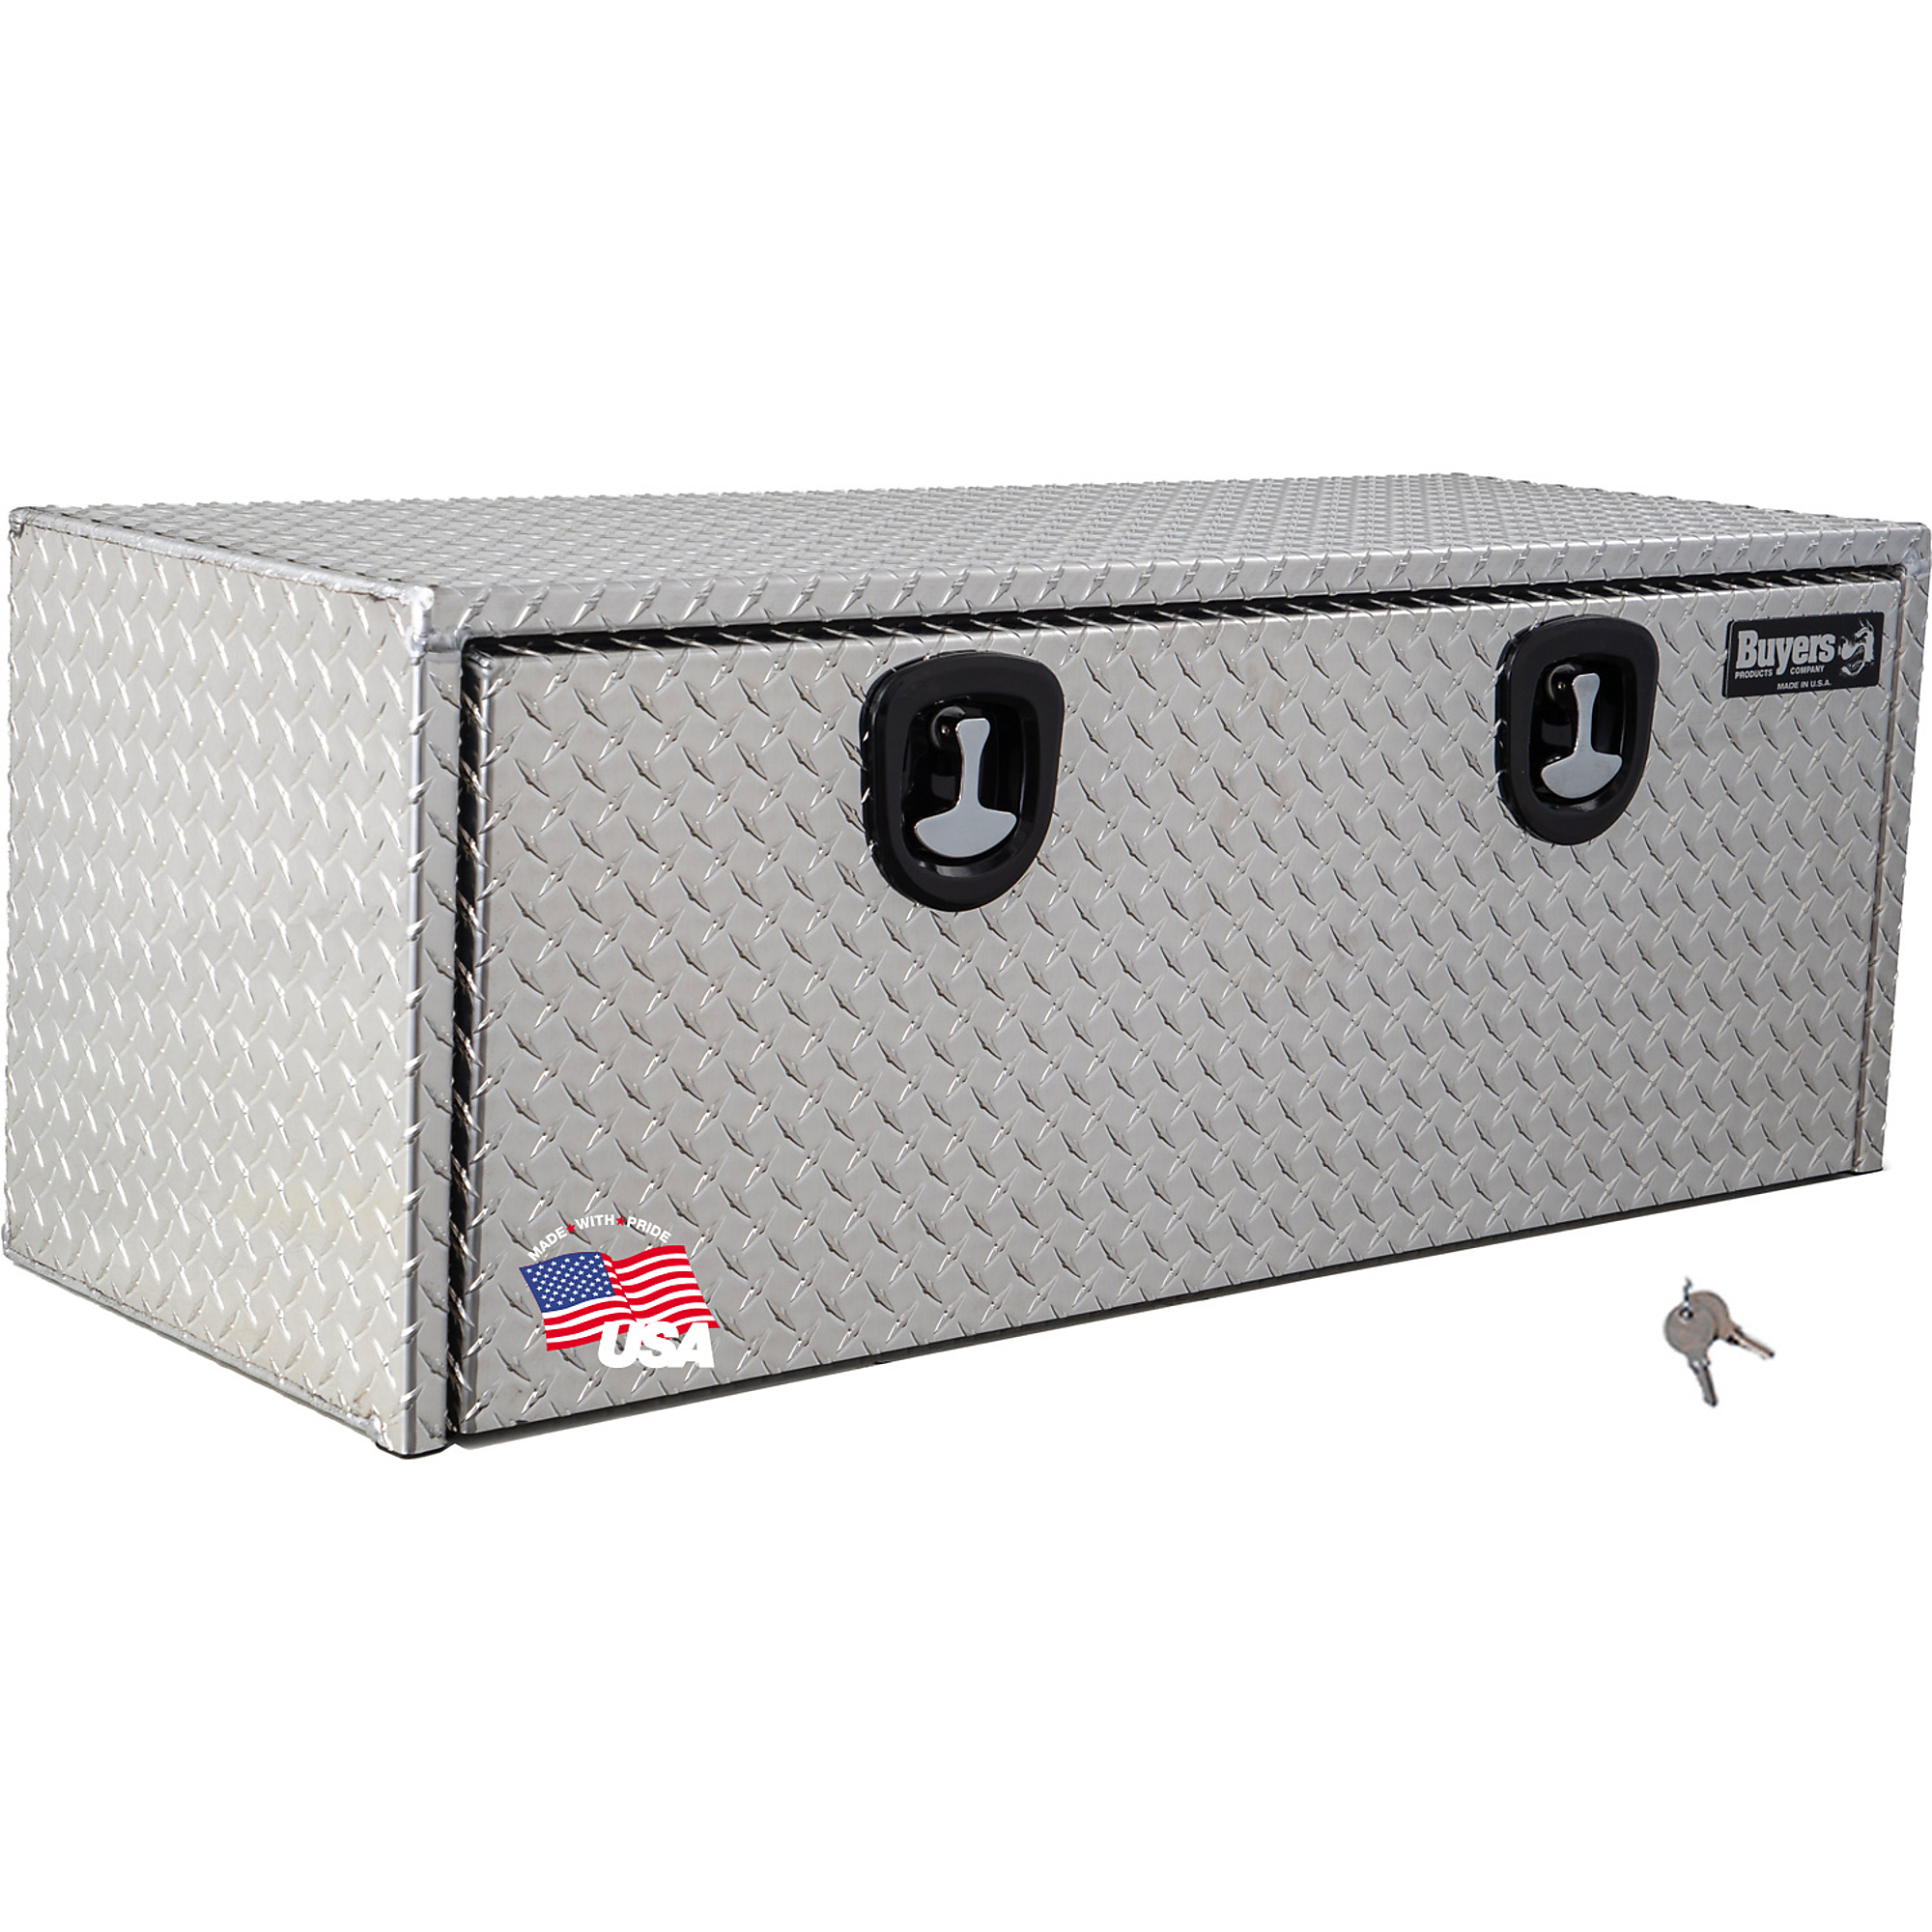 Buyers Products, Underbody Truck Box, Width 48 in, Material Aluminum, Color Finish Diamond Plate Silver, Model 1705110